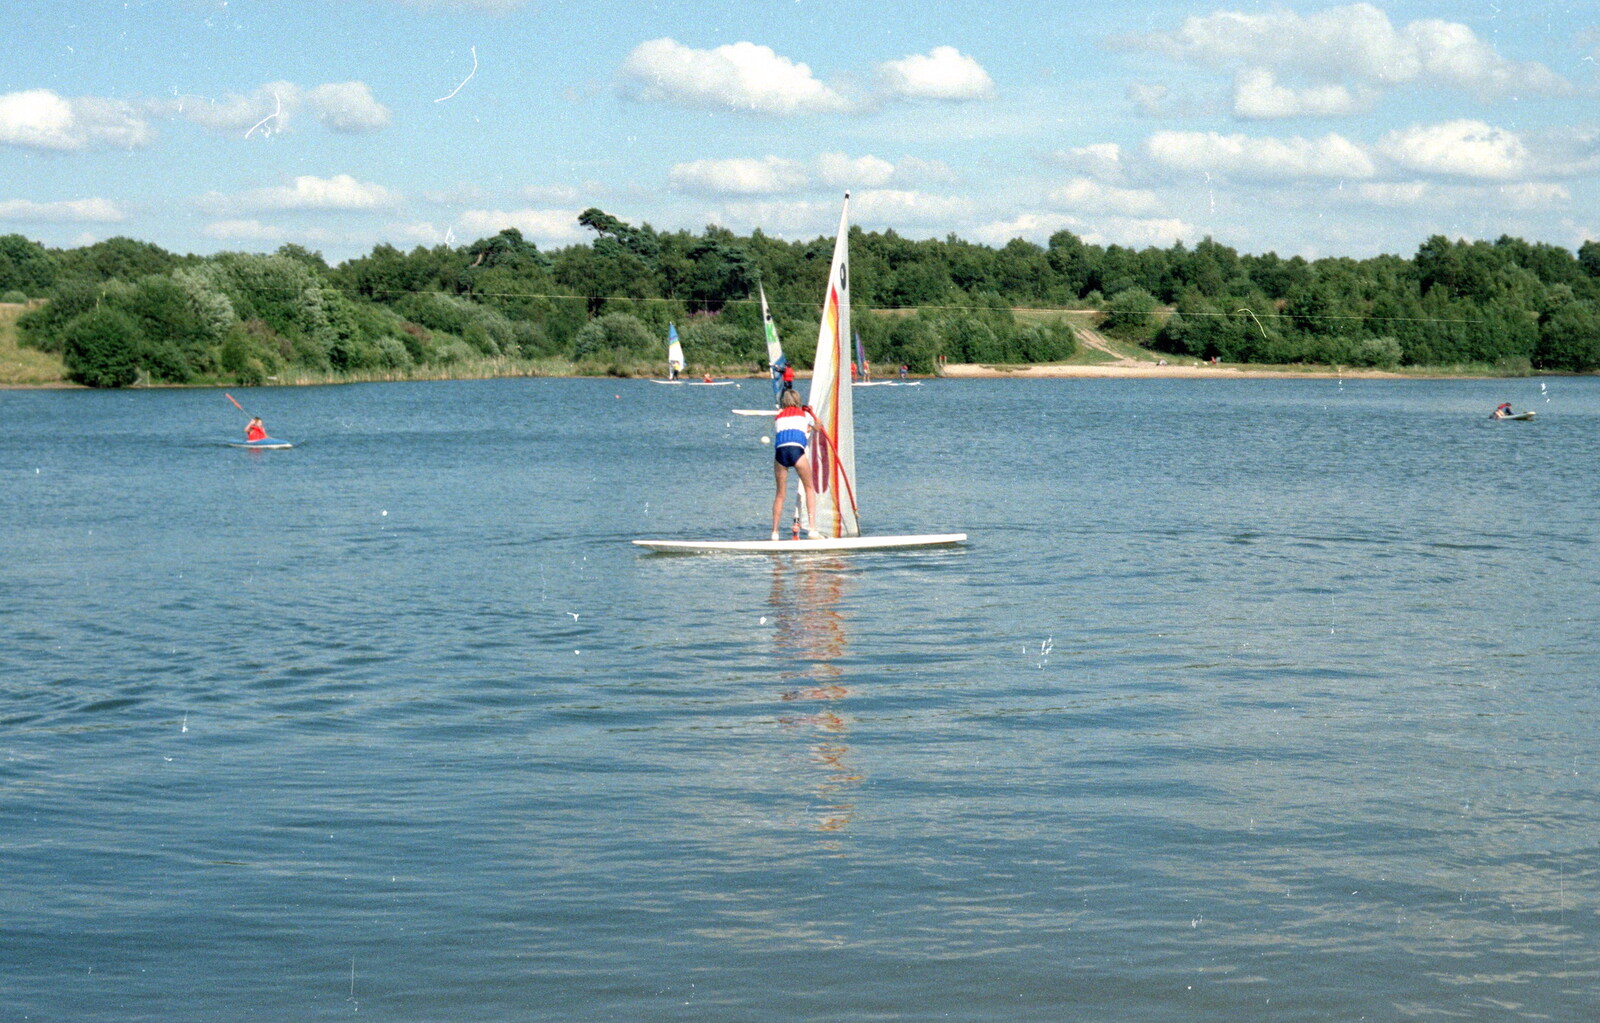 Nosher's away on the windsurfer from Nosher Goes Windsurfing, Macclesfield, Cheshire - 20th June 1985